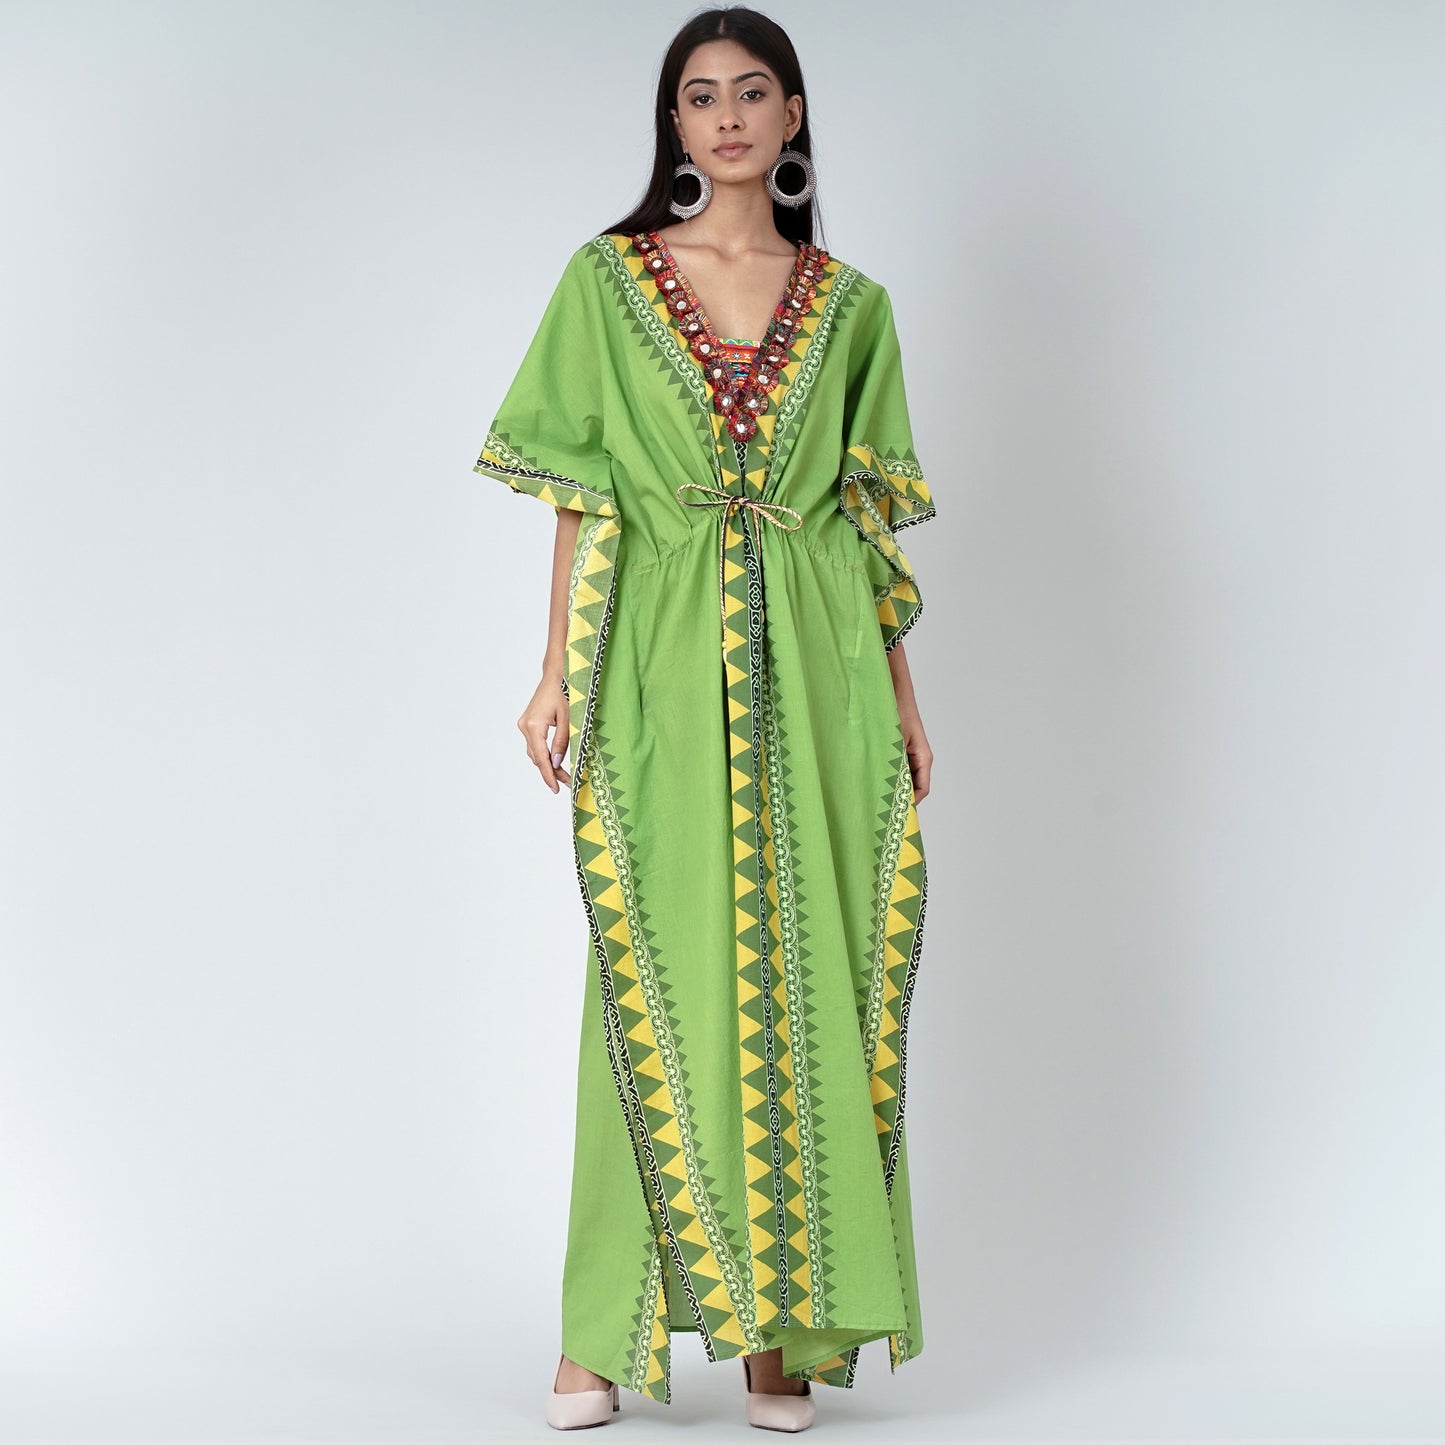 Green Tribal Full Length Kaftan with Mirror Lace